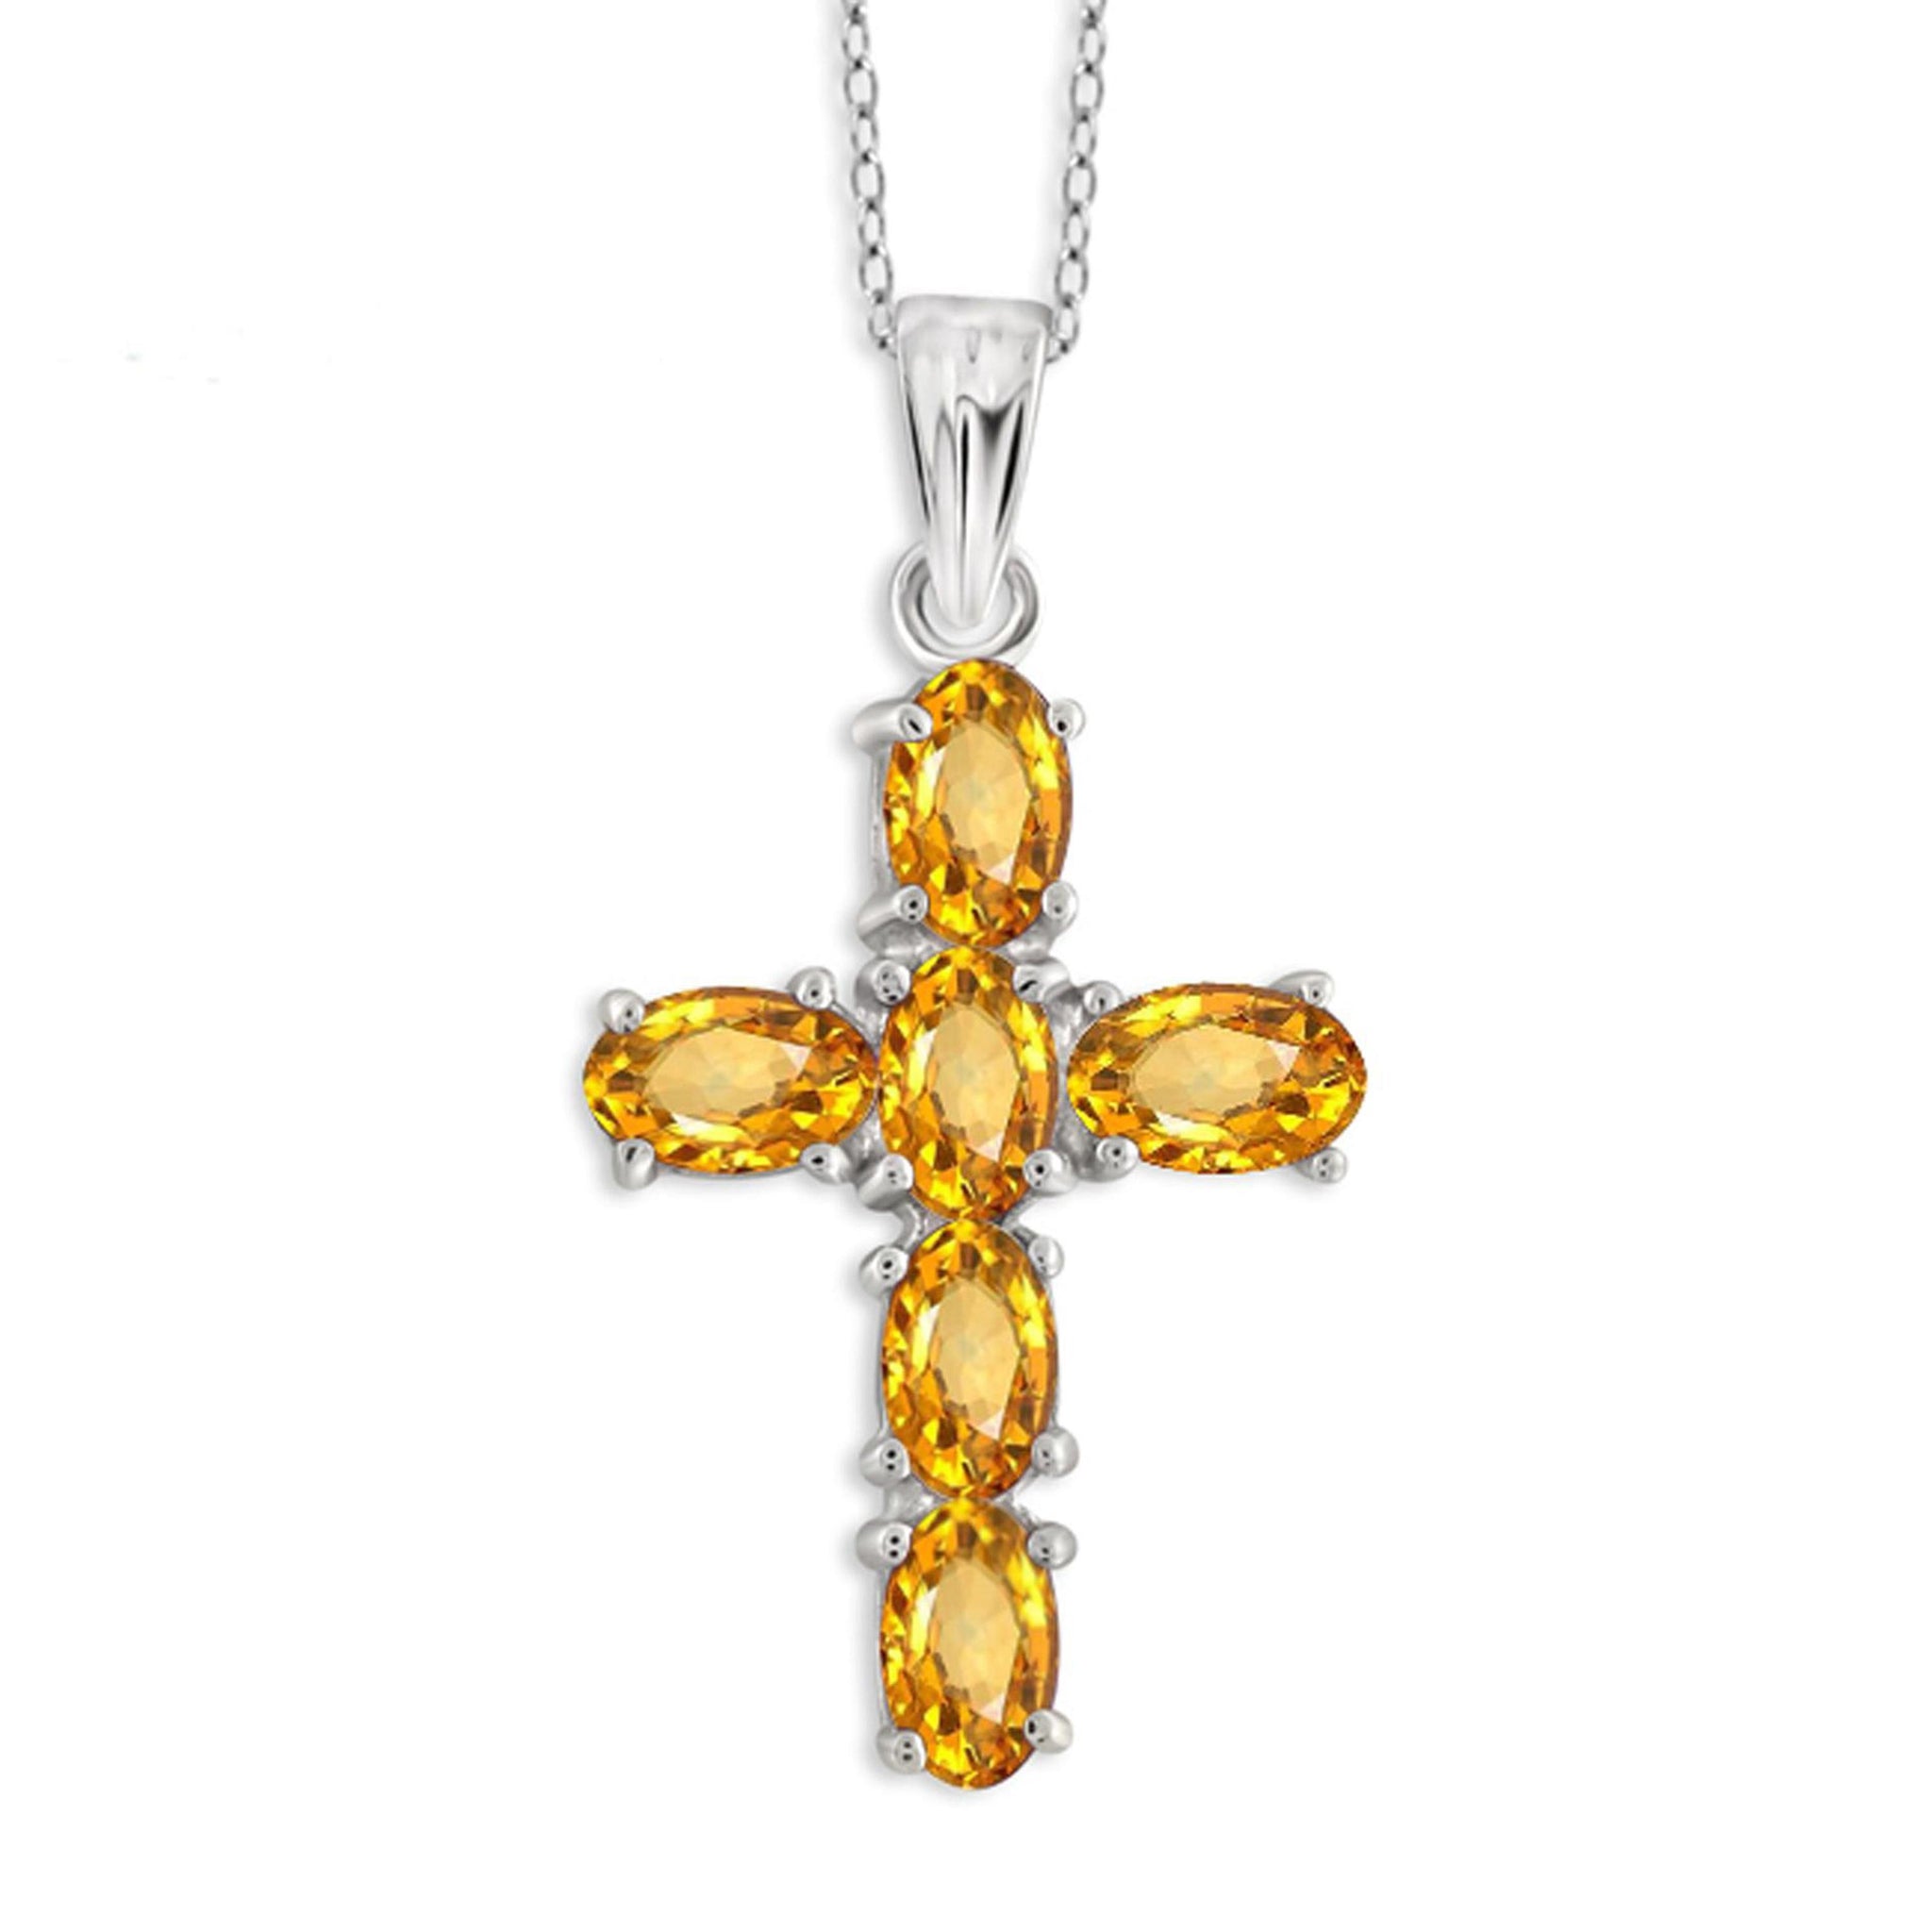 JewelonFire 1 1/3 Carat T.G.W. Citrine Sterling Silver Cross Pendant - Assorted Colors